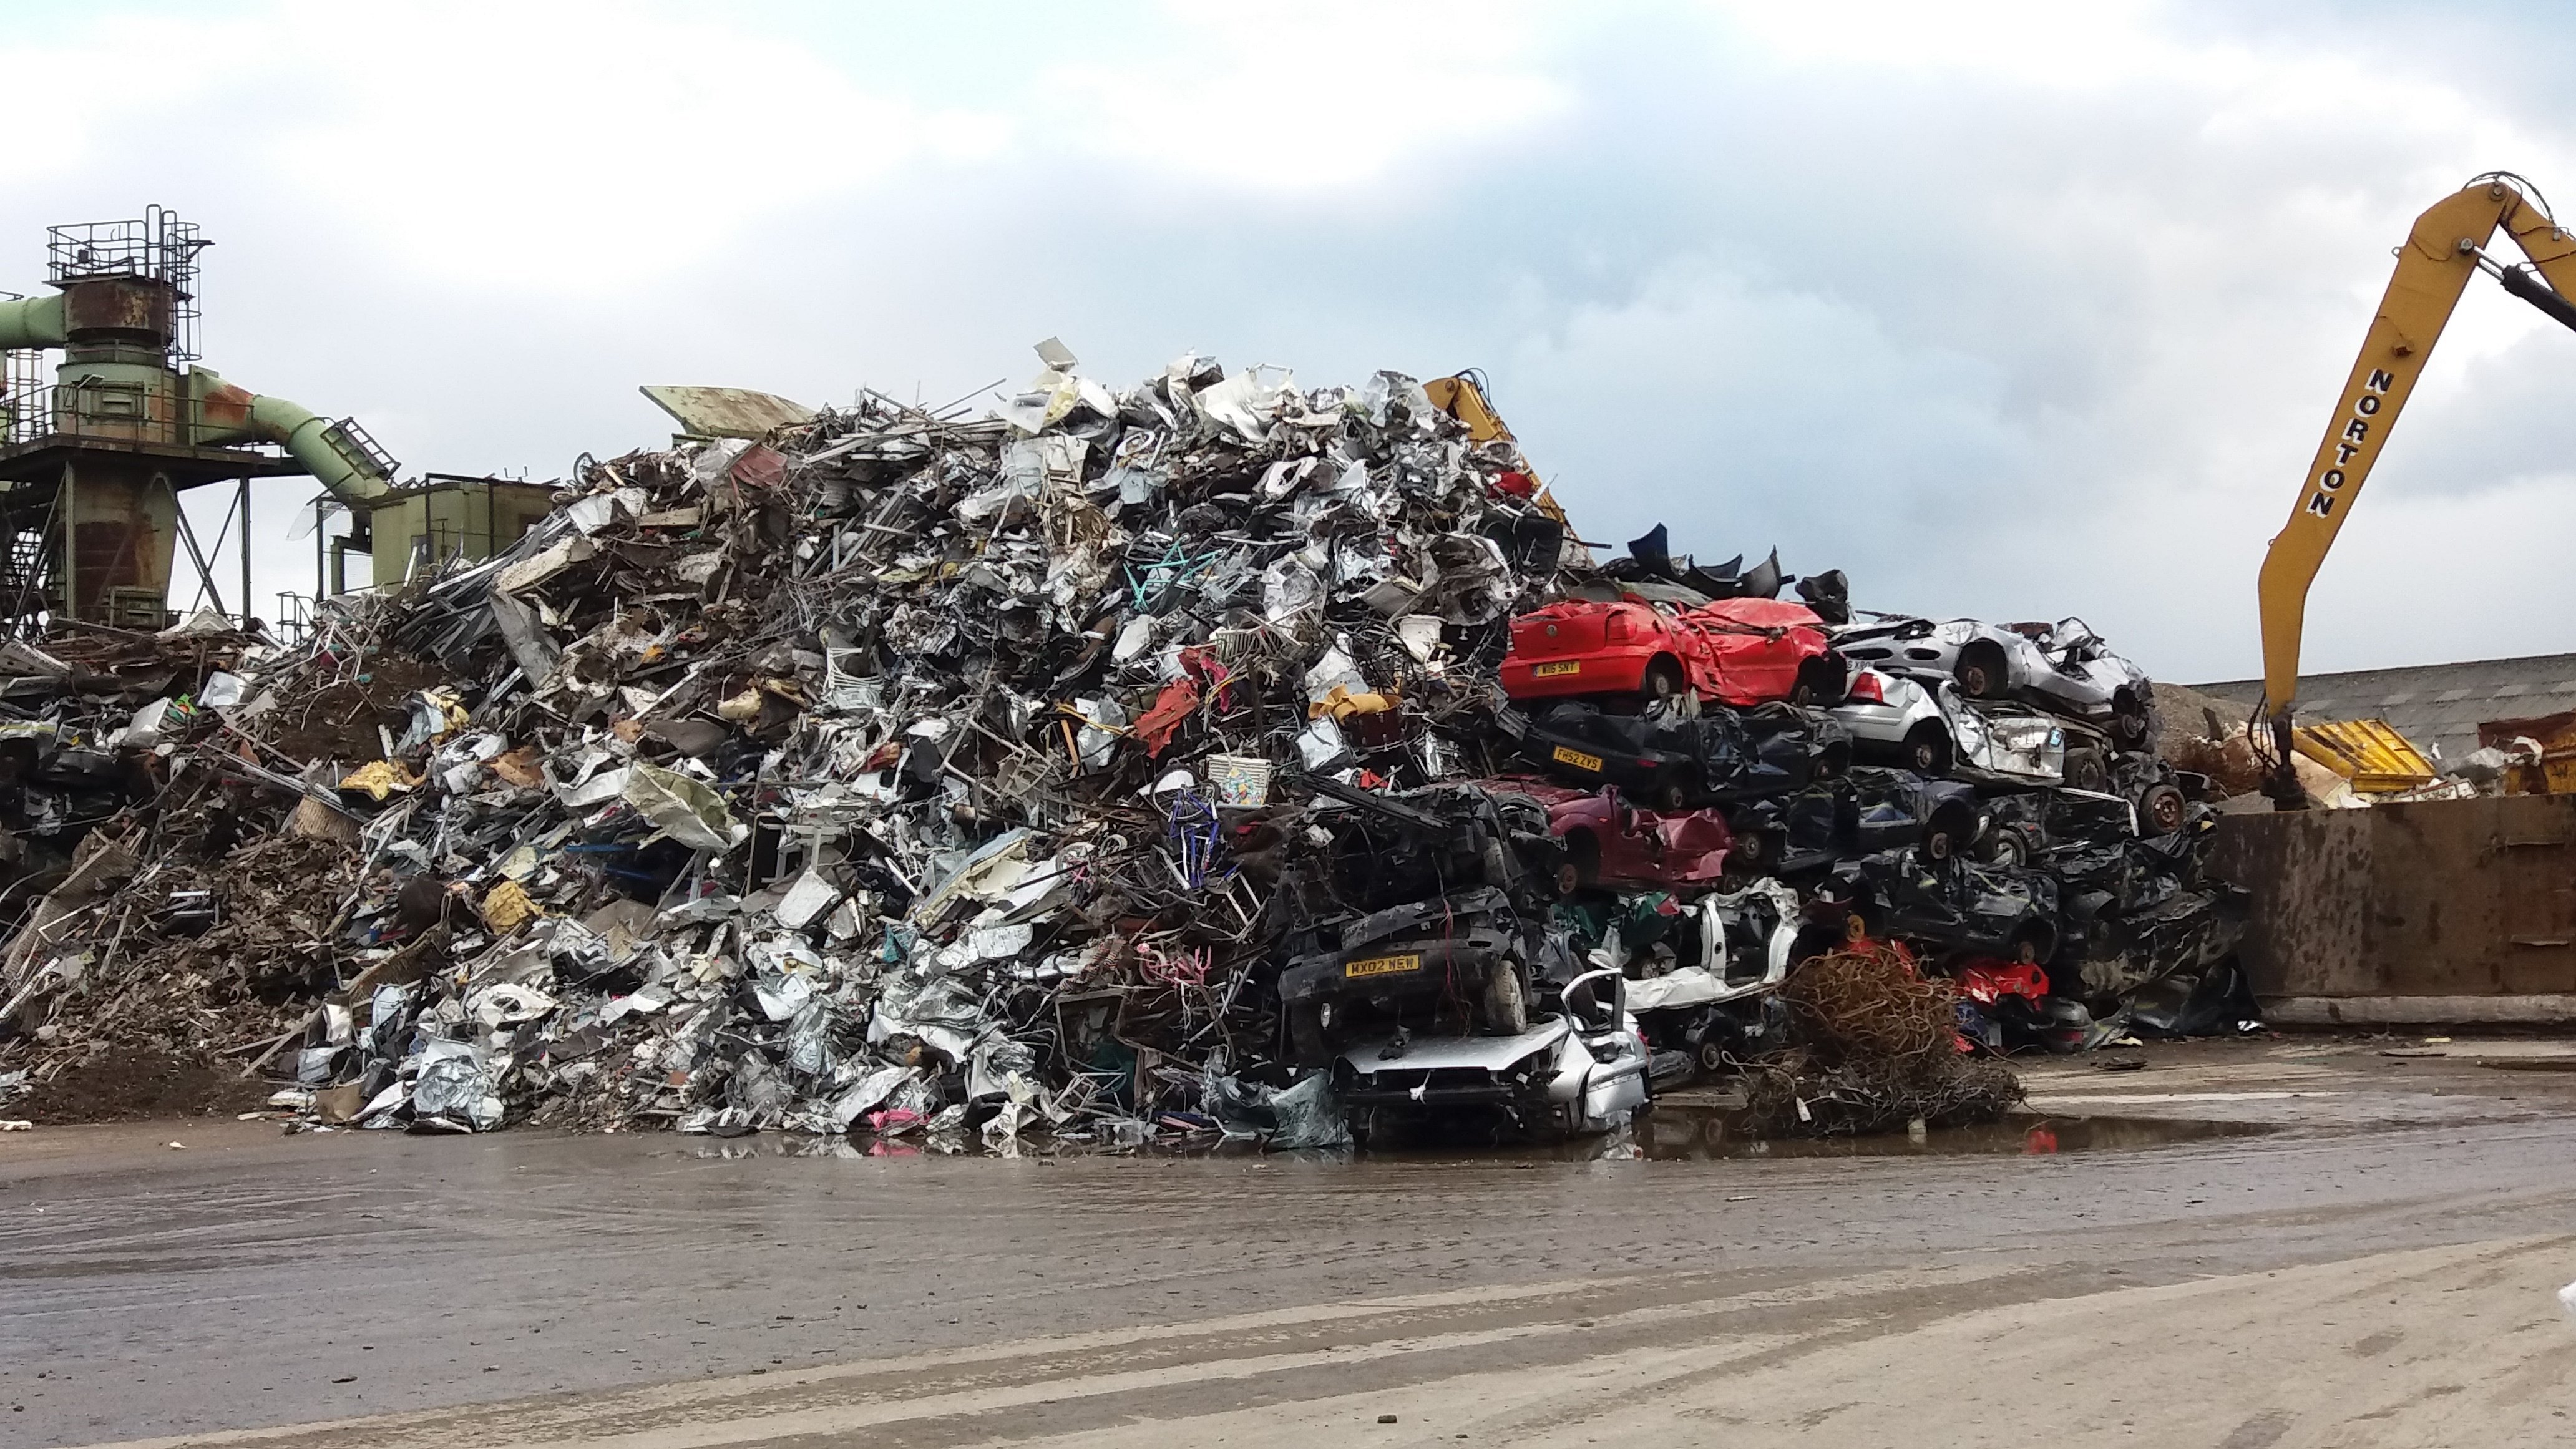 Composites UK has put together a new report covering how to best dispose of or recycle of waste fiber reinforced polymer material.